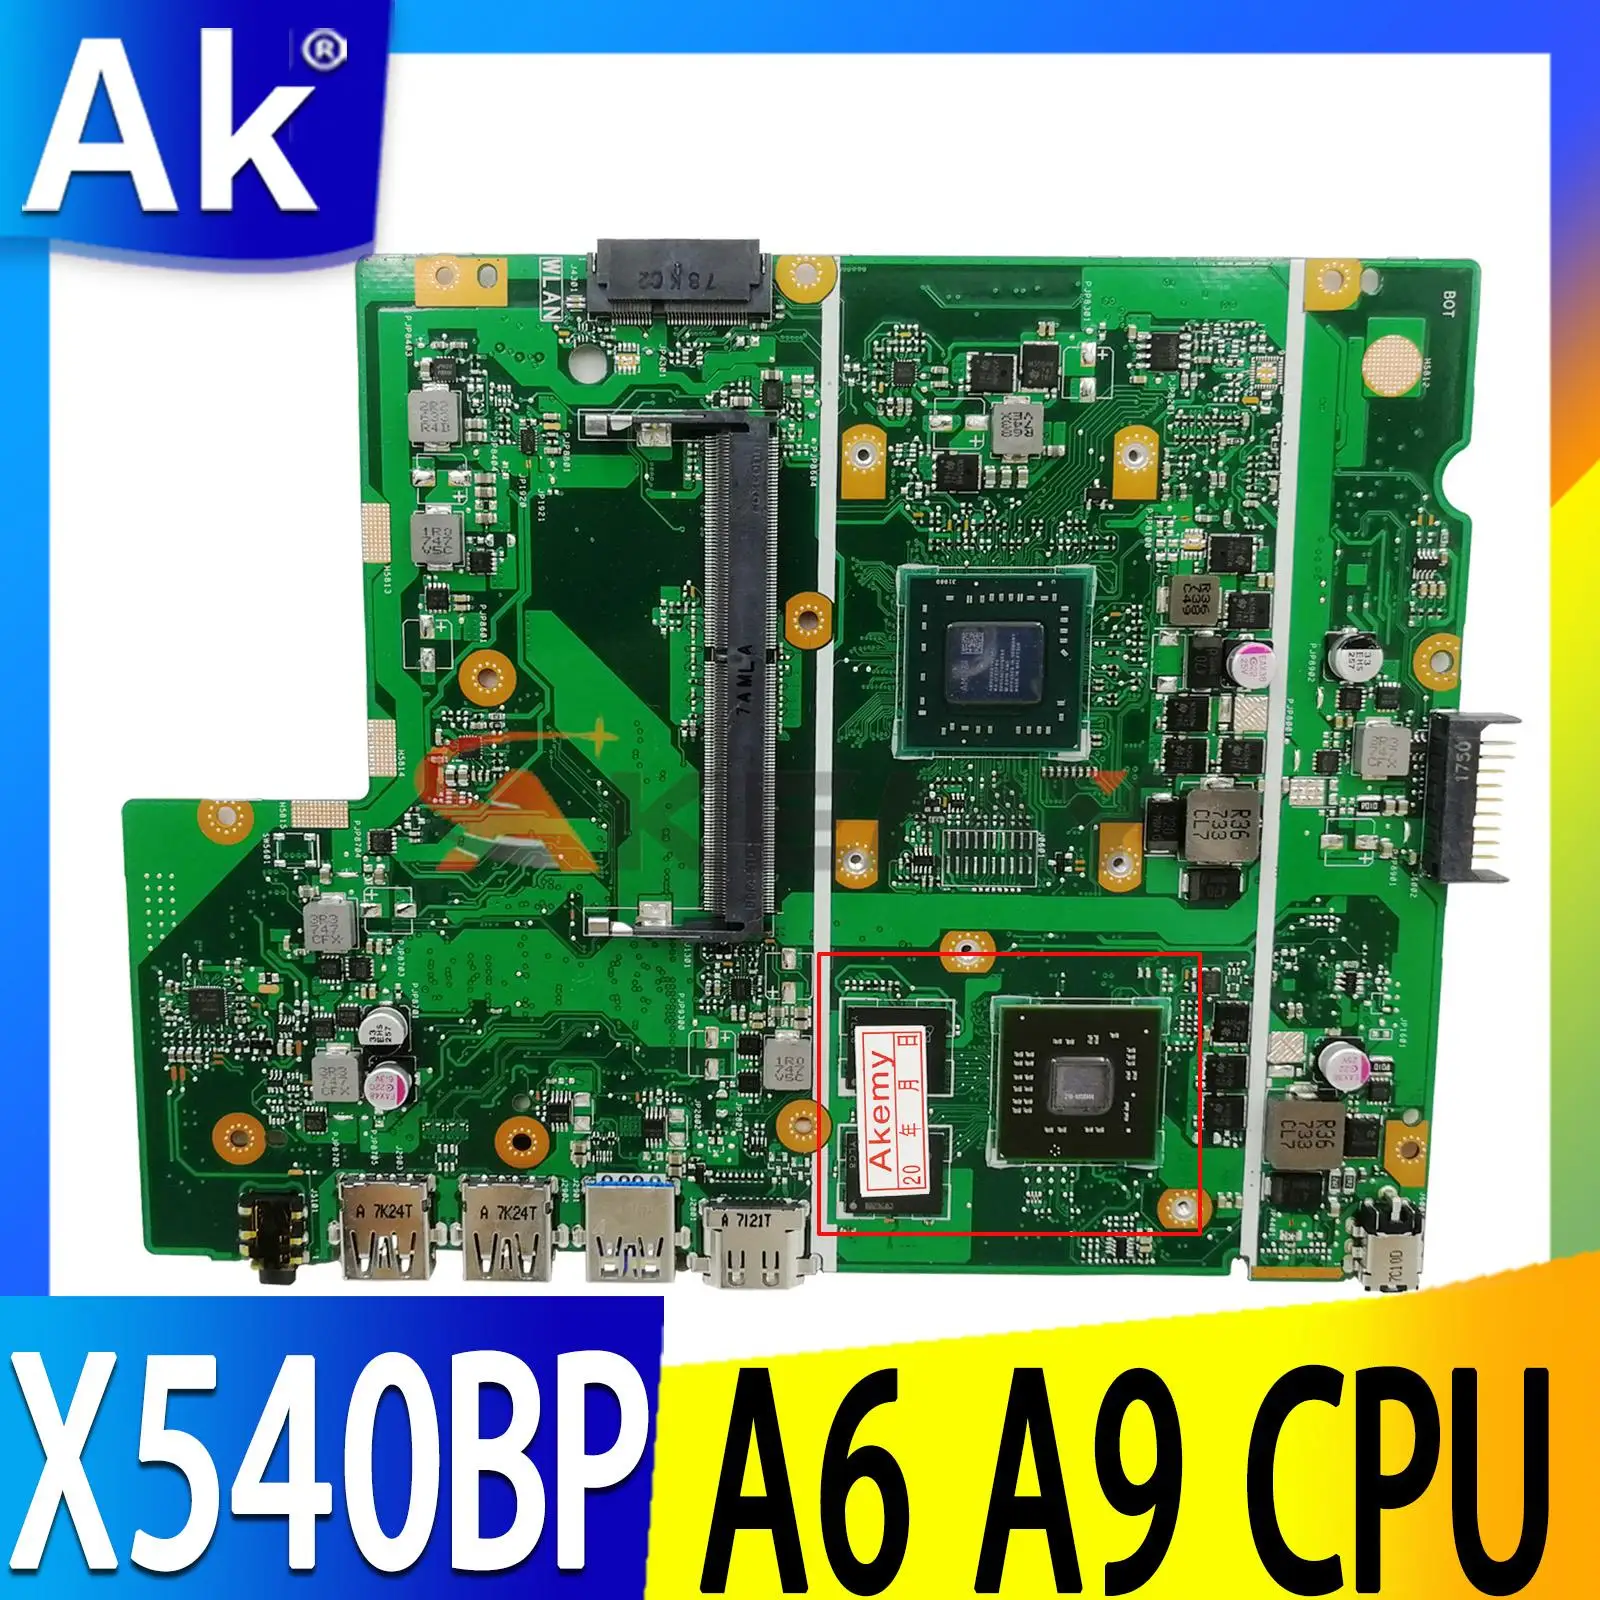 

X540BP Mainboard With AMD A6-9225 A9-9425 CPU For ASUS X540 X540BP X540BA X540B Laptop Motherboard 100% Working Well